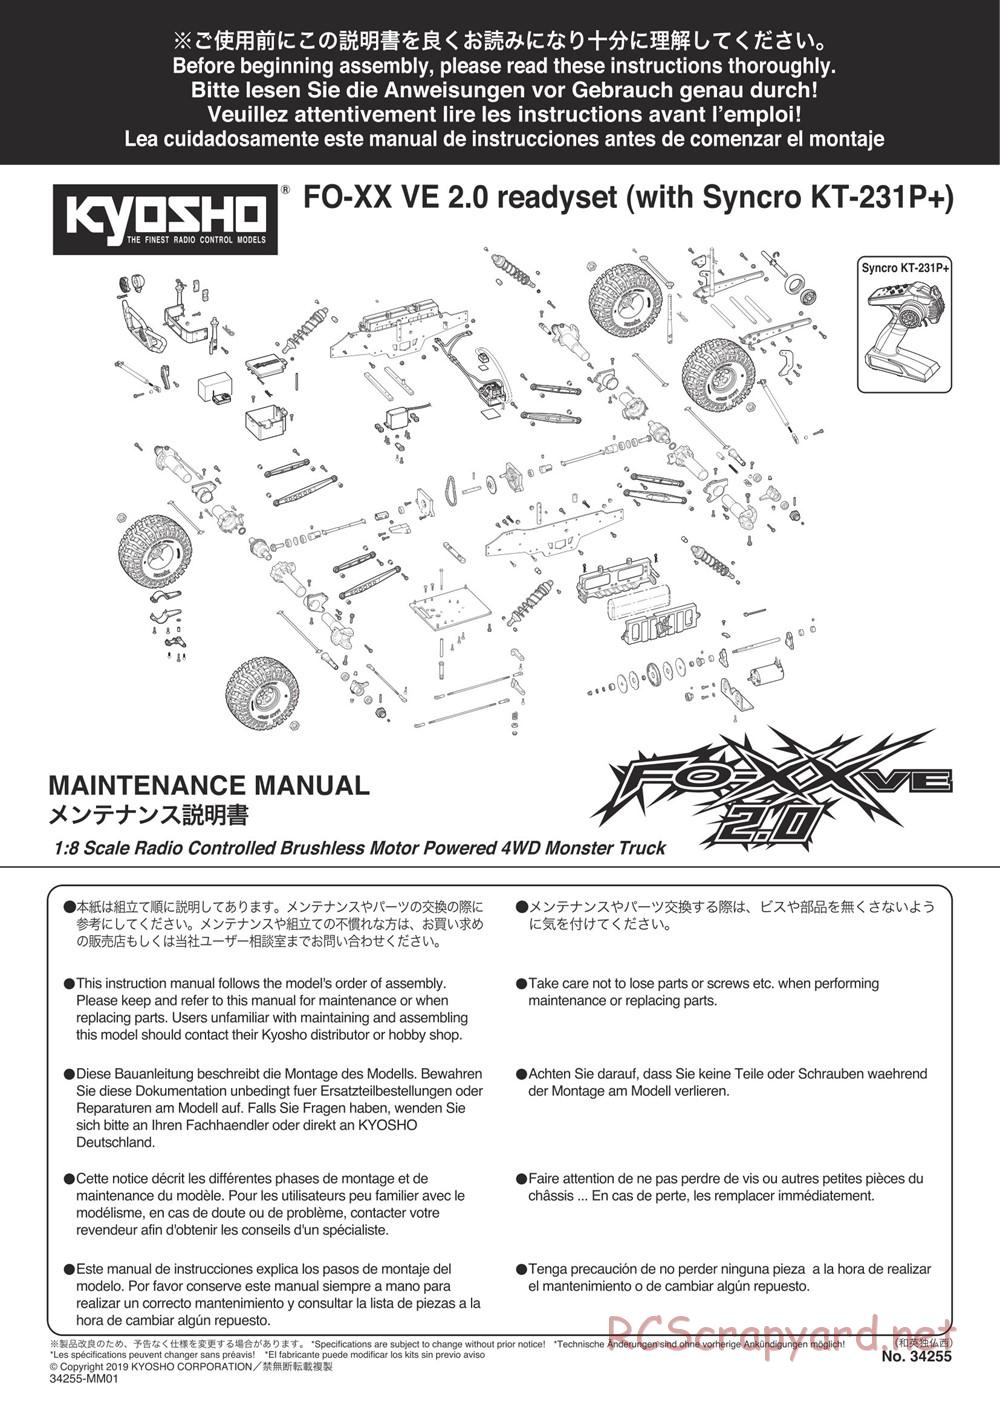 Kyosho - FO-XX VE 2.0 - Manual - Page 1